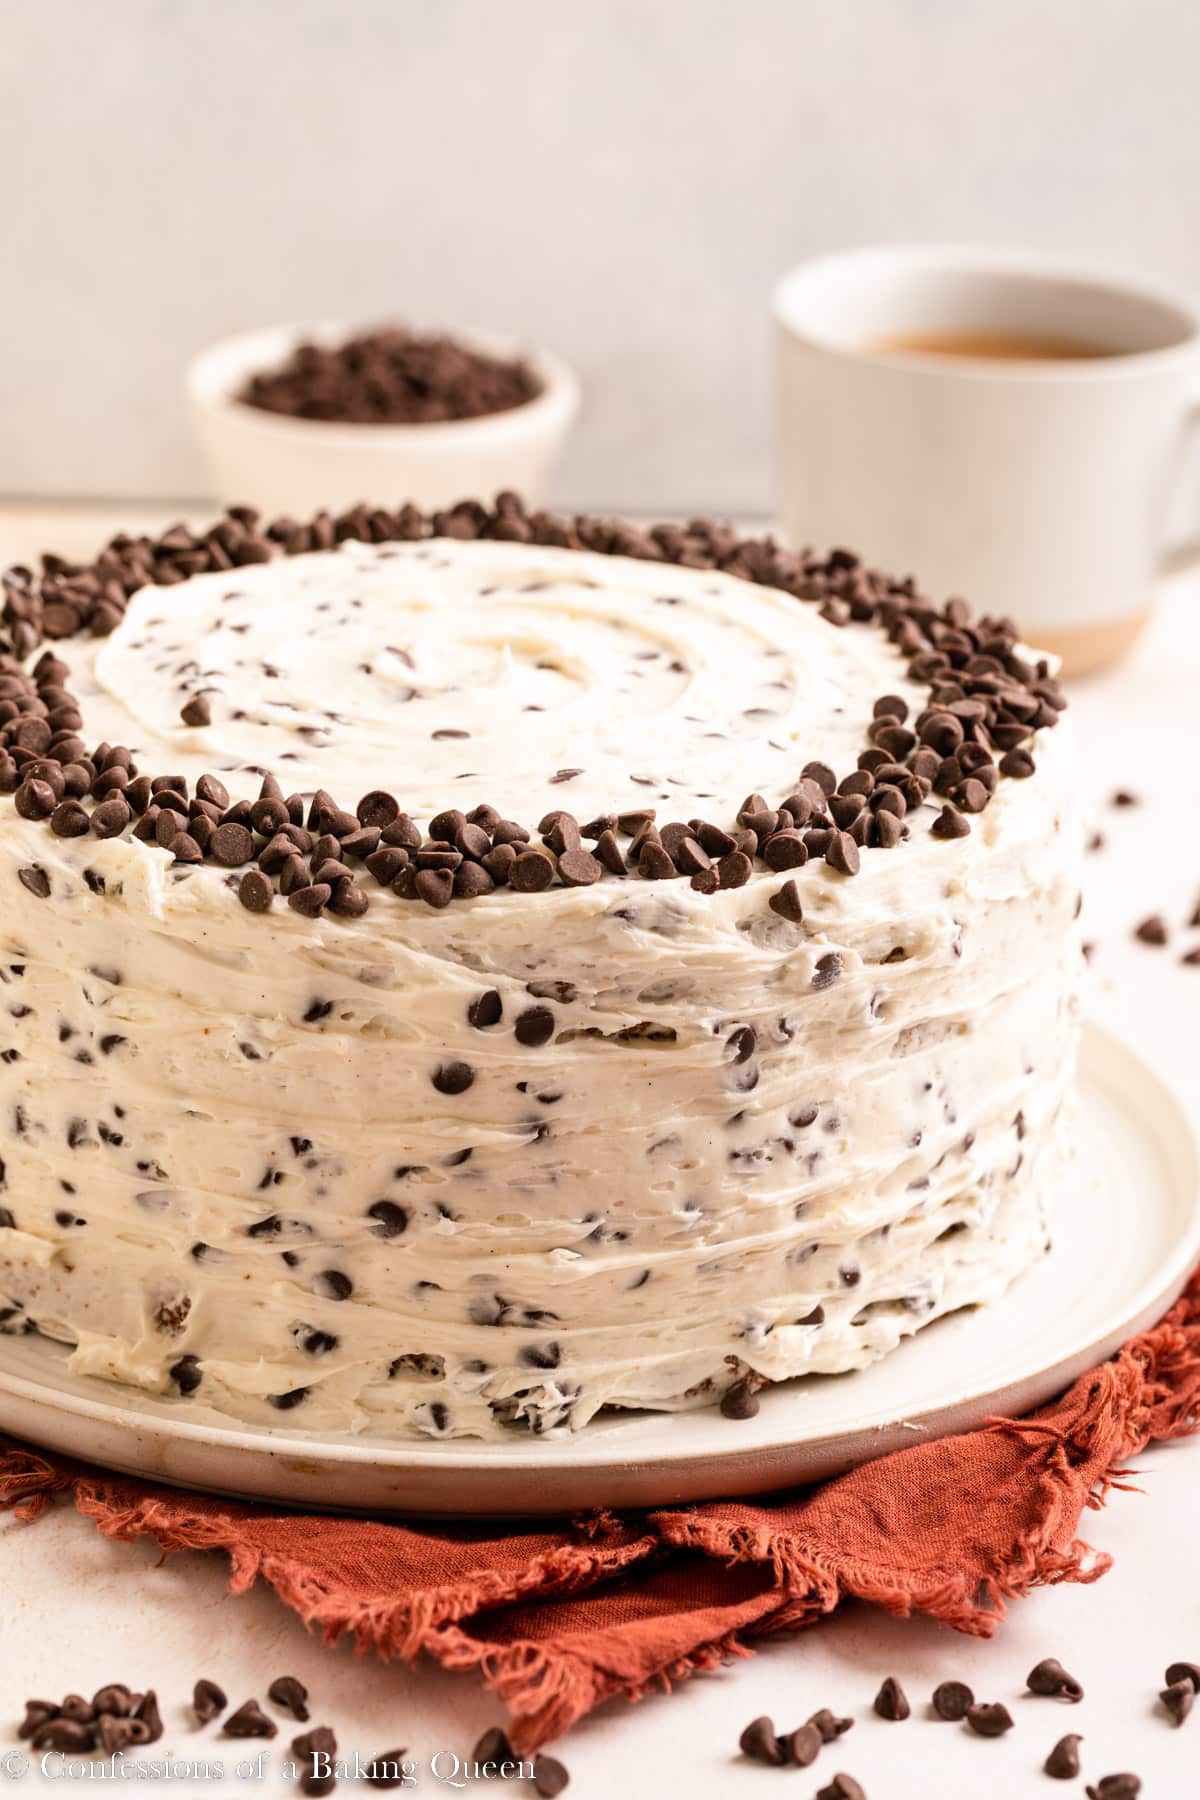 Chocolate chip cake on a serving platter near a cup of coffee and a bowl f mini chocolate chips.